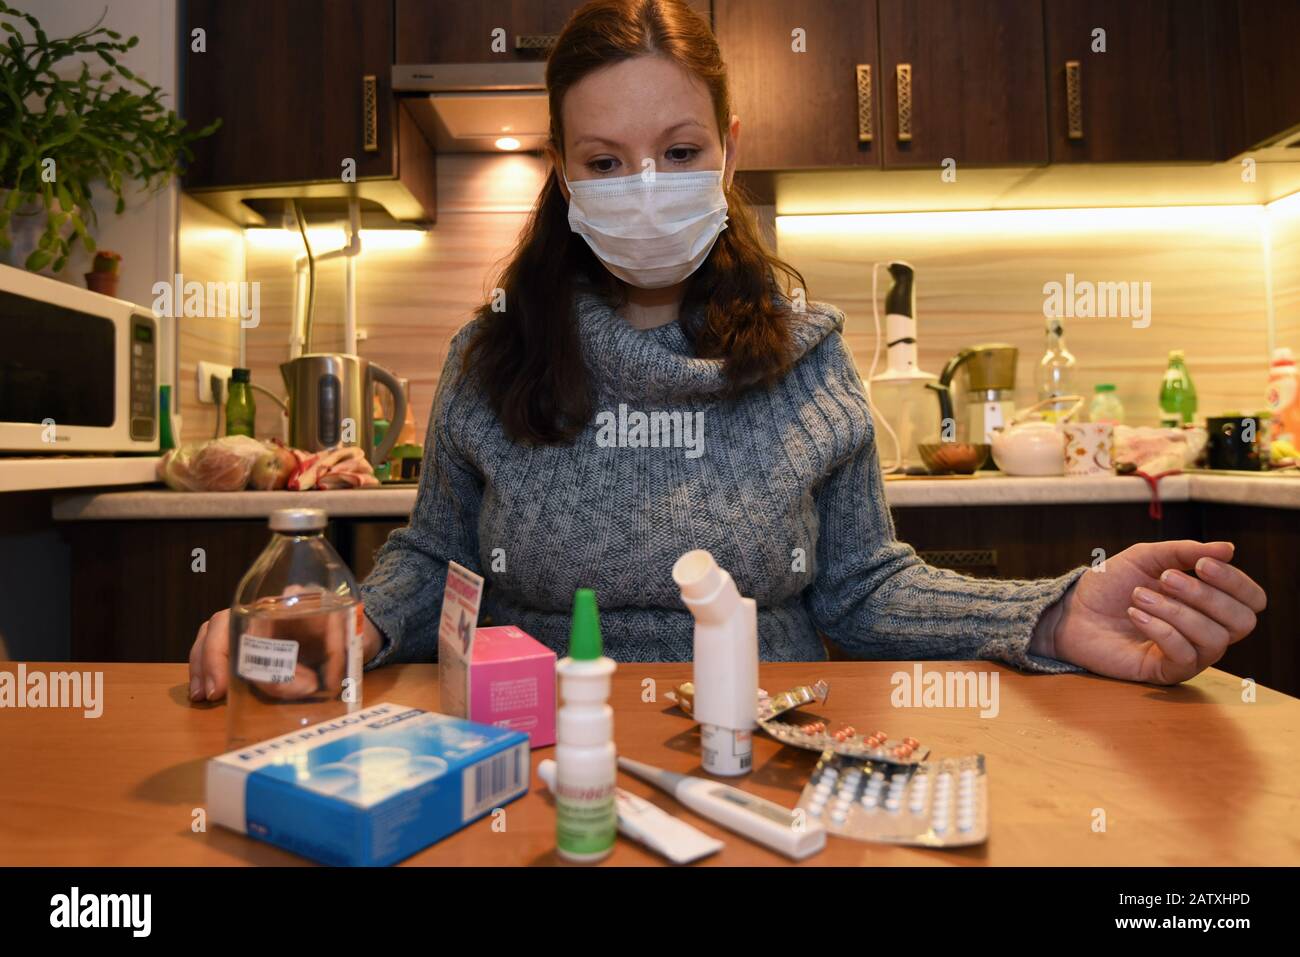 Woman in the mask being ill with a flu choses the medicaments in the kitchen. Stock Photo